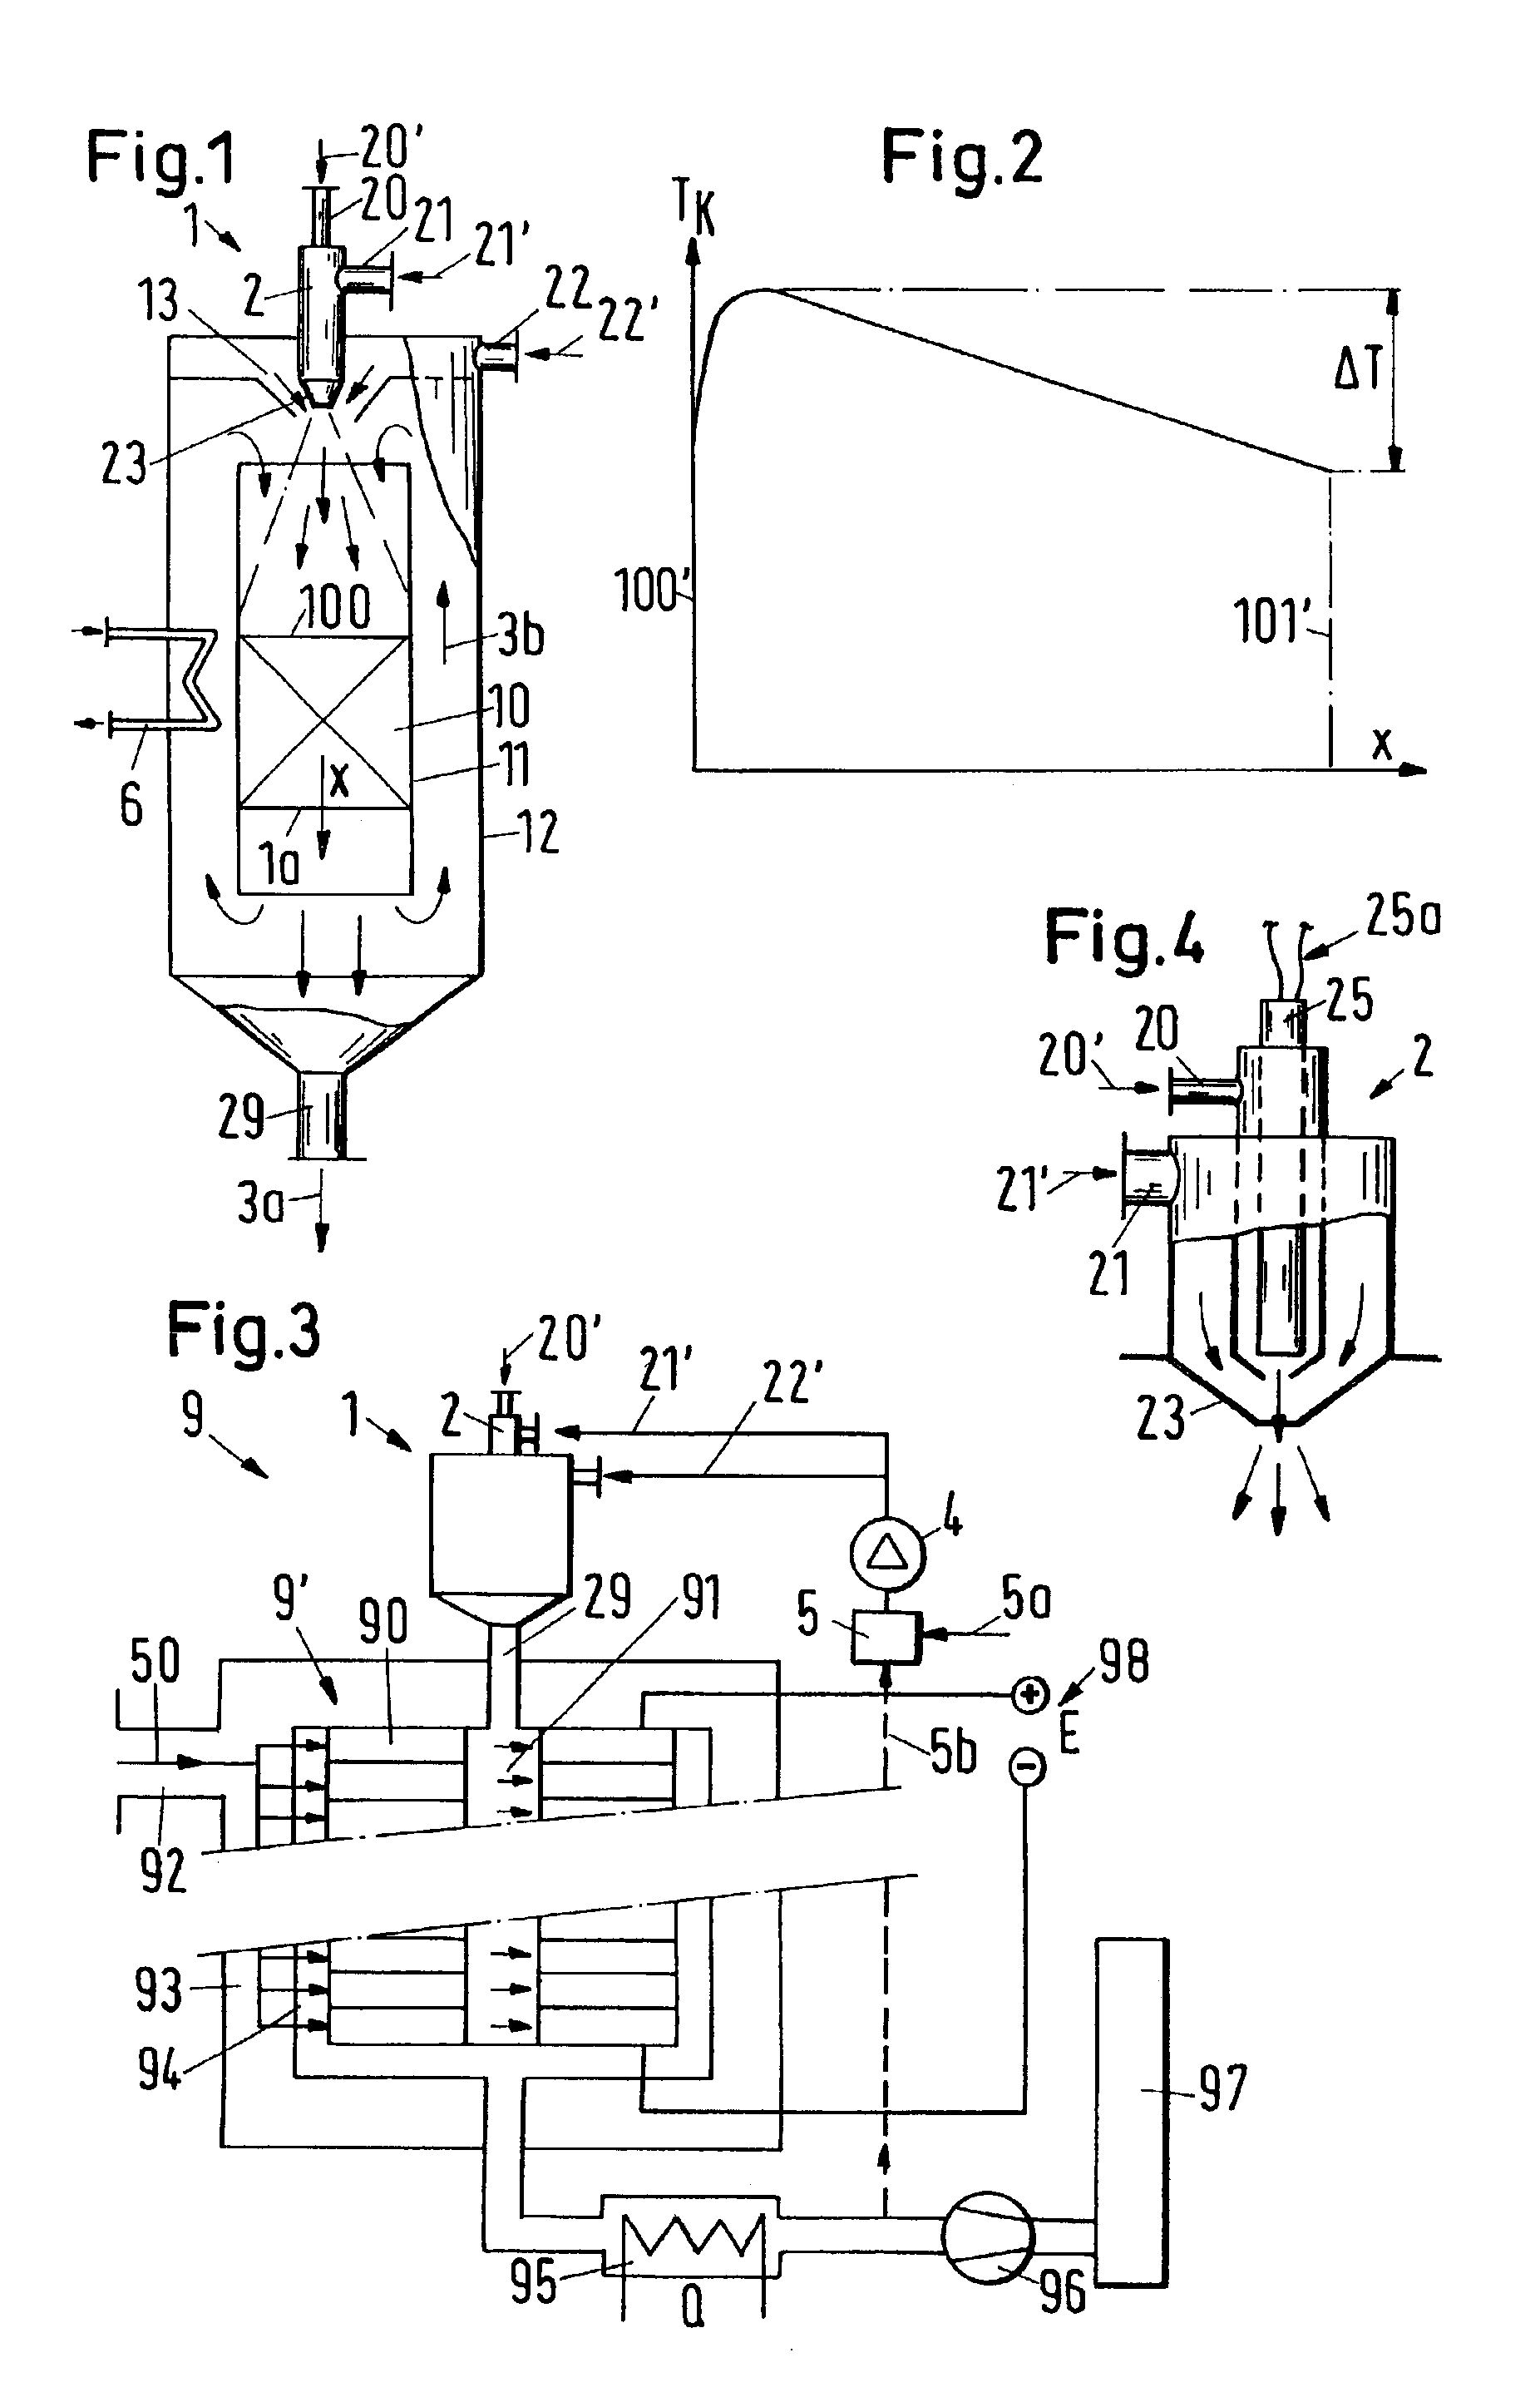 Method for the reformation of fuels, in particular heating oil